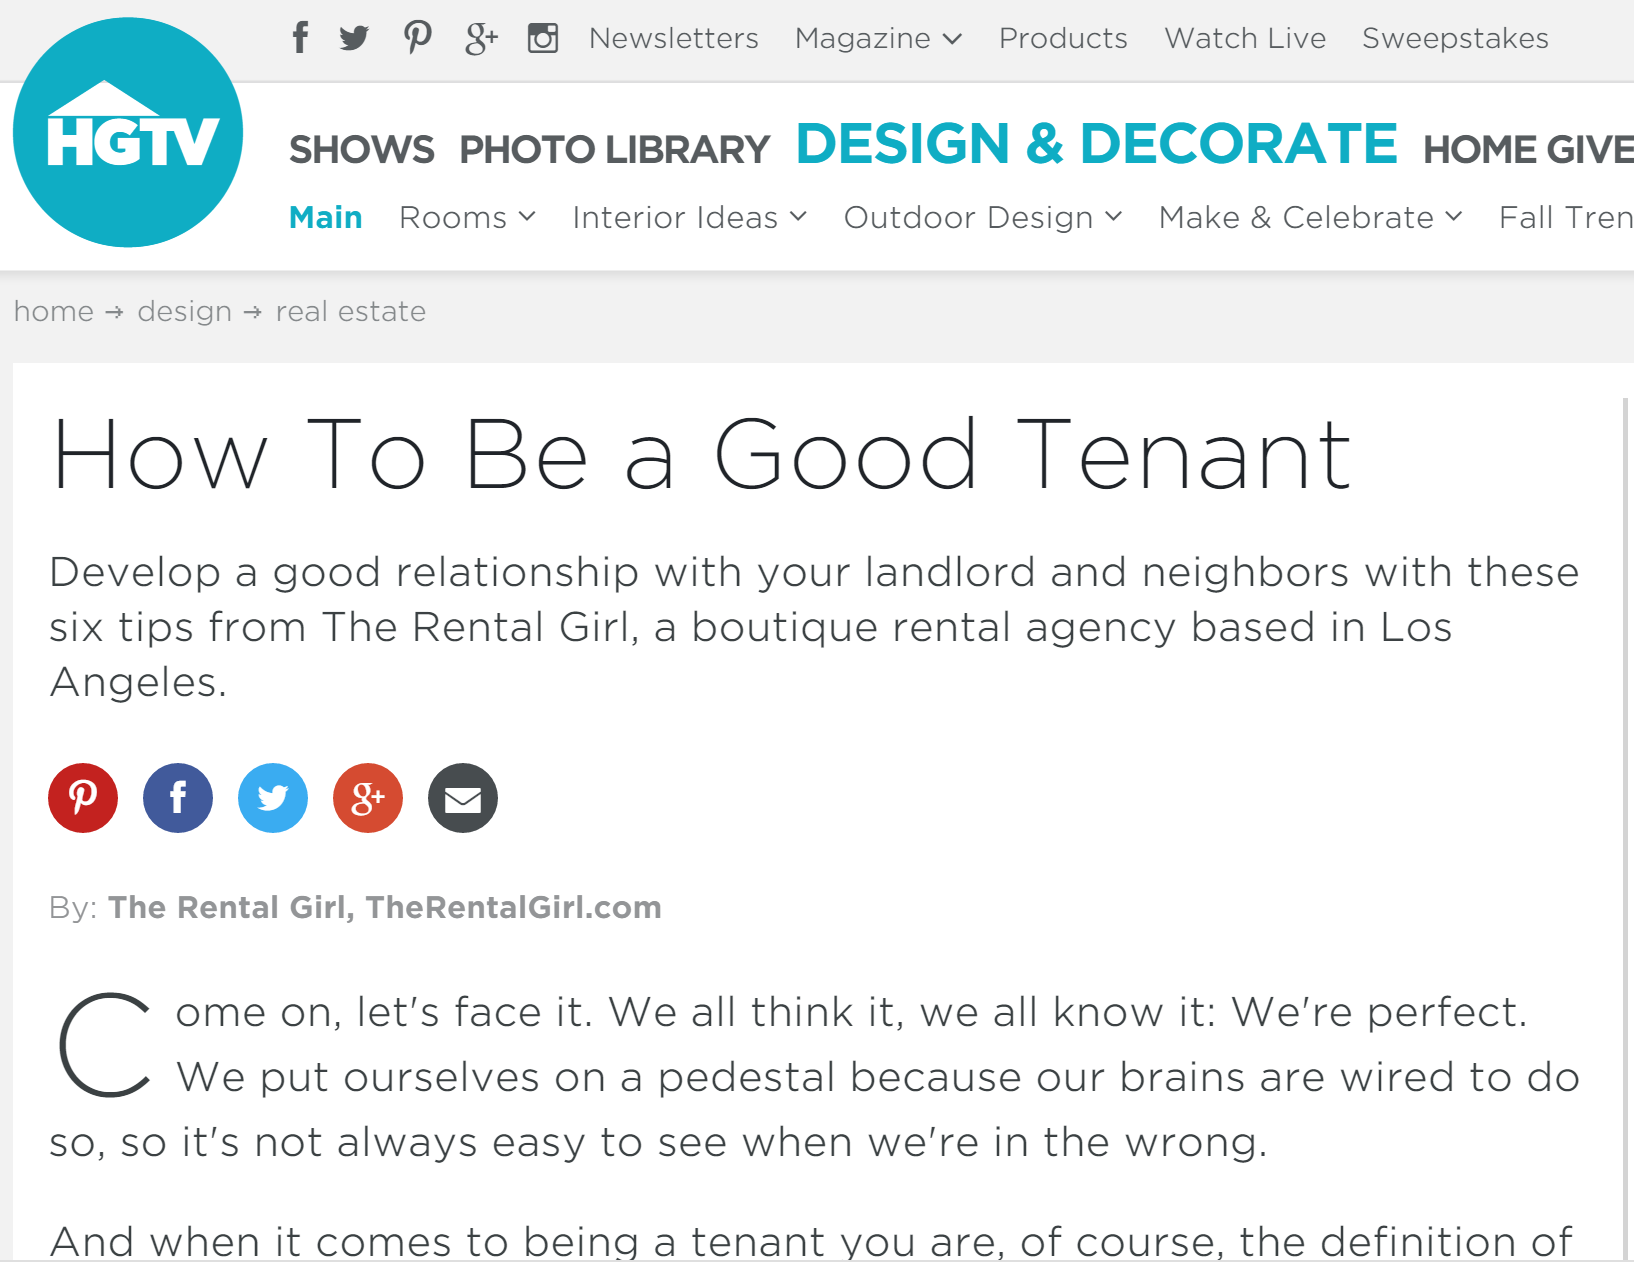 HGTV How to be a good tenant